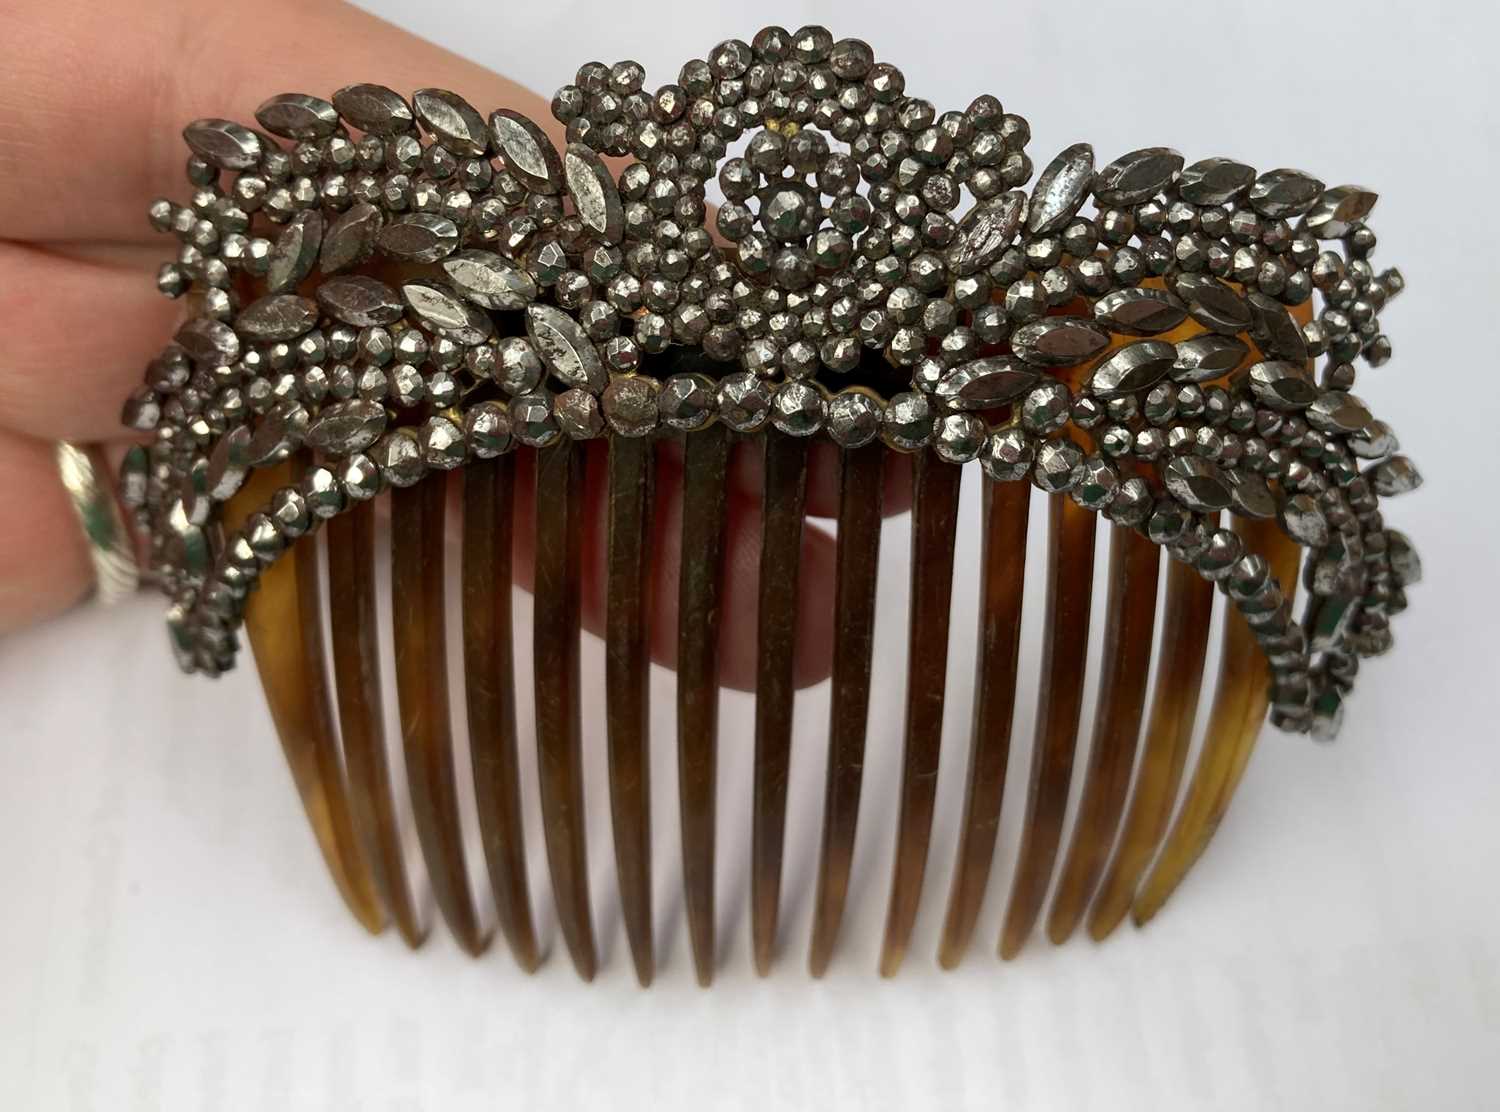 19th Century and Later Cut Steel Jewellery, comprising a decorative tiara with rotating flower heads - Image 12 of 19